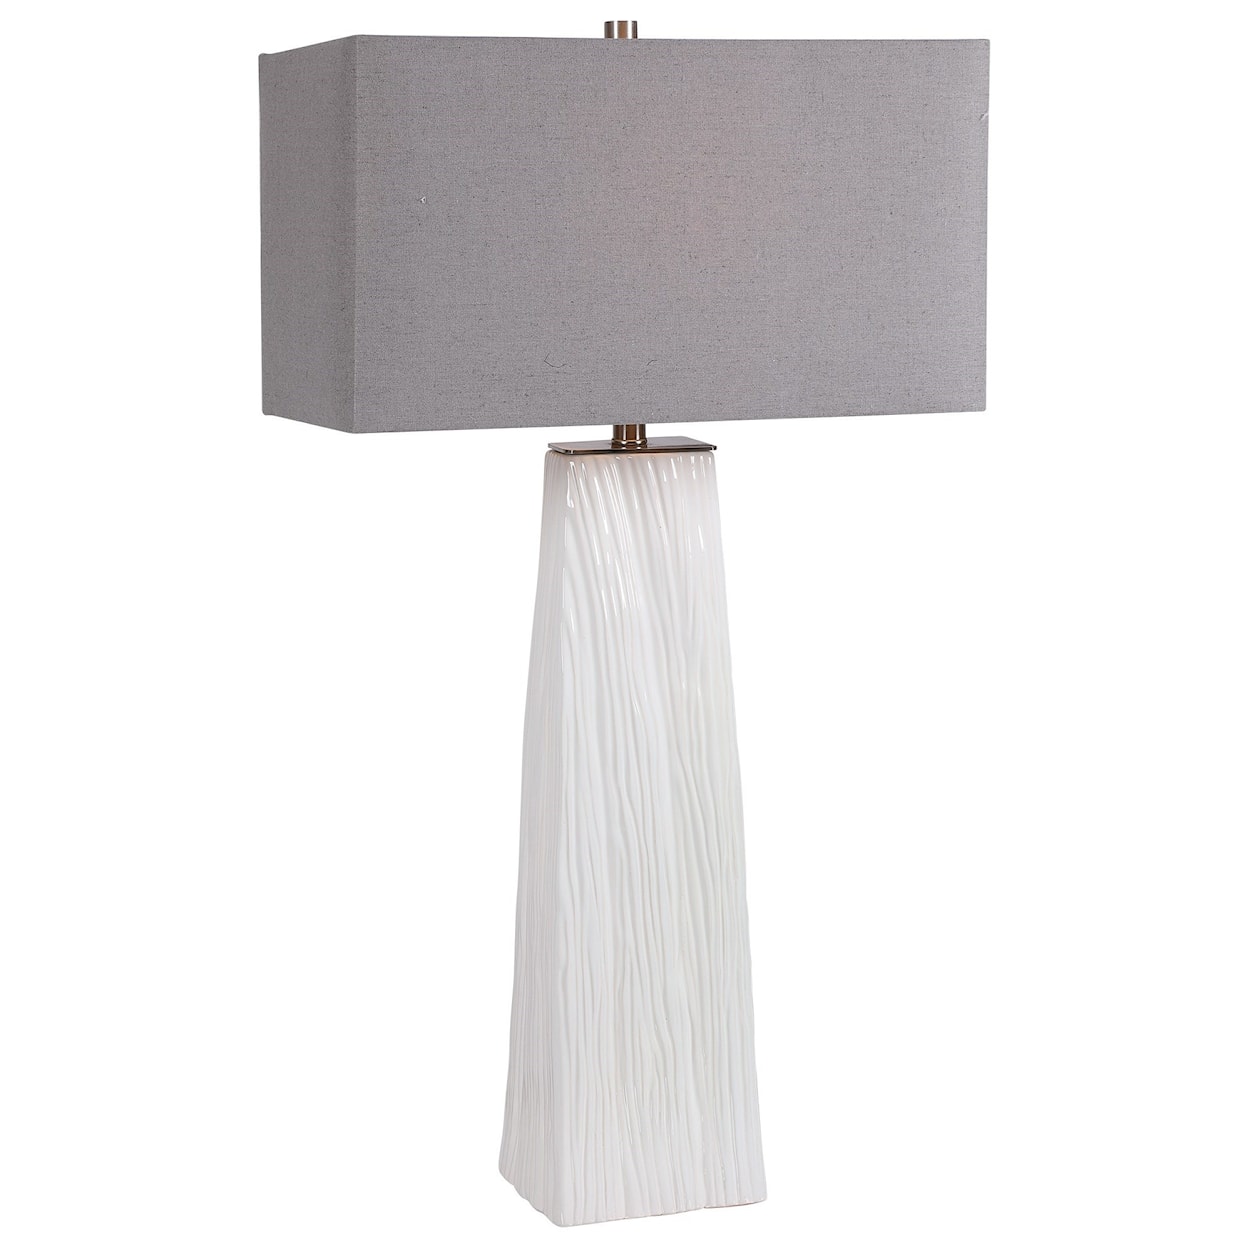 Uttermost Table Lamps Sycamore White Table Lamp